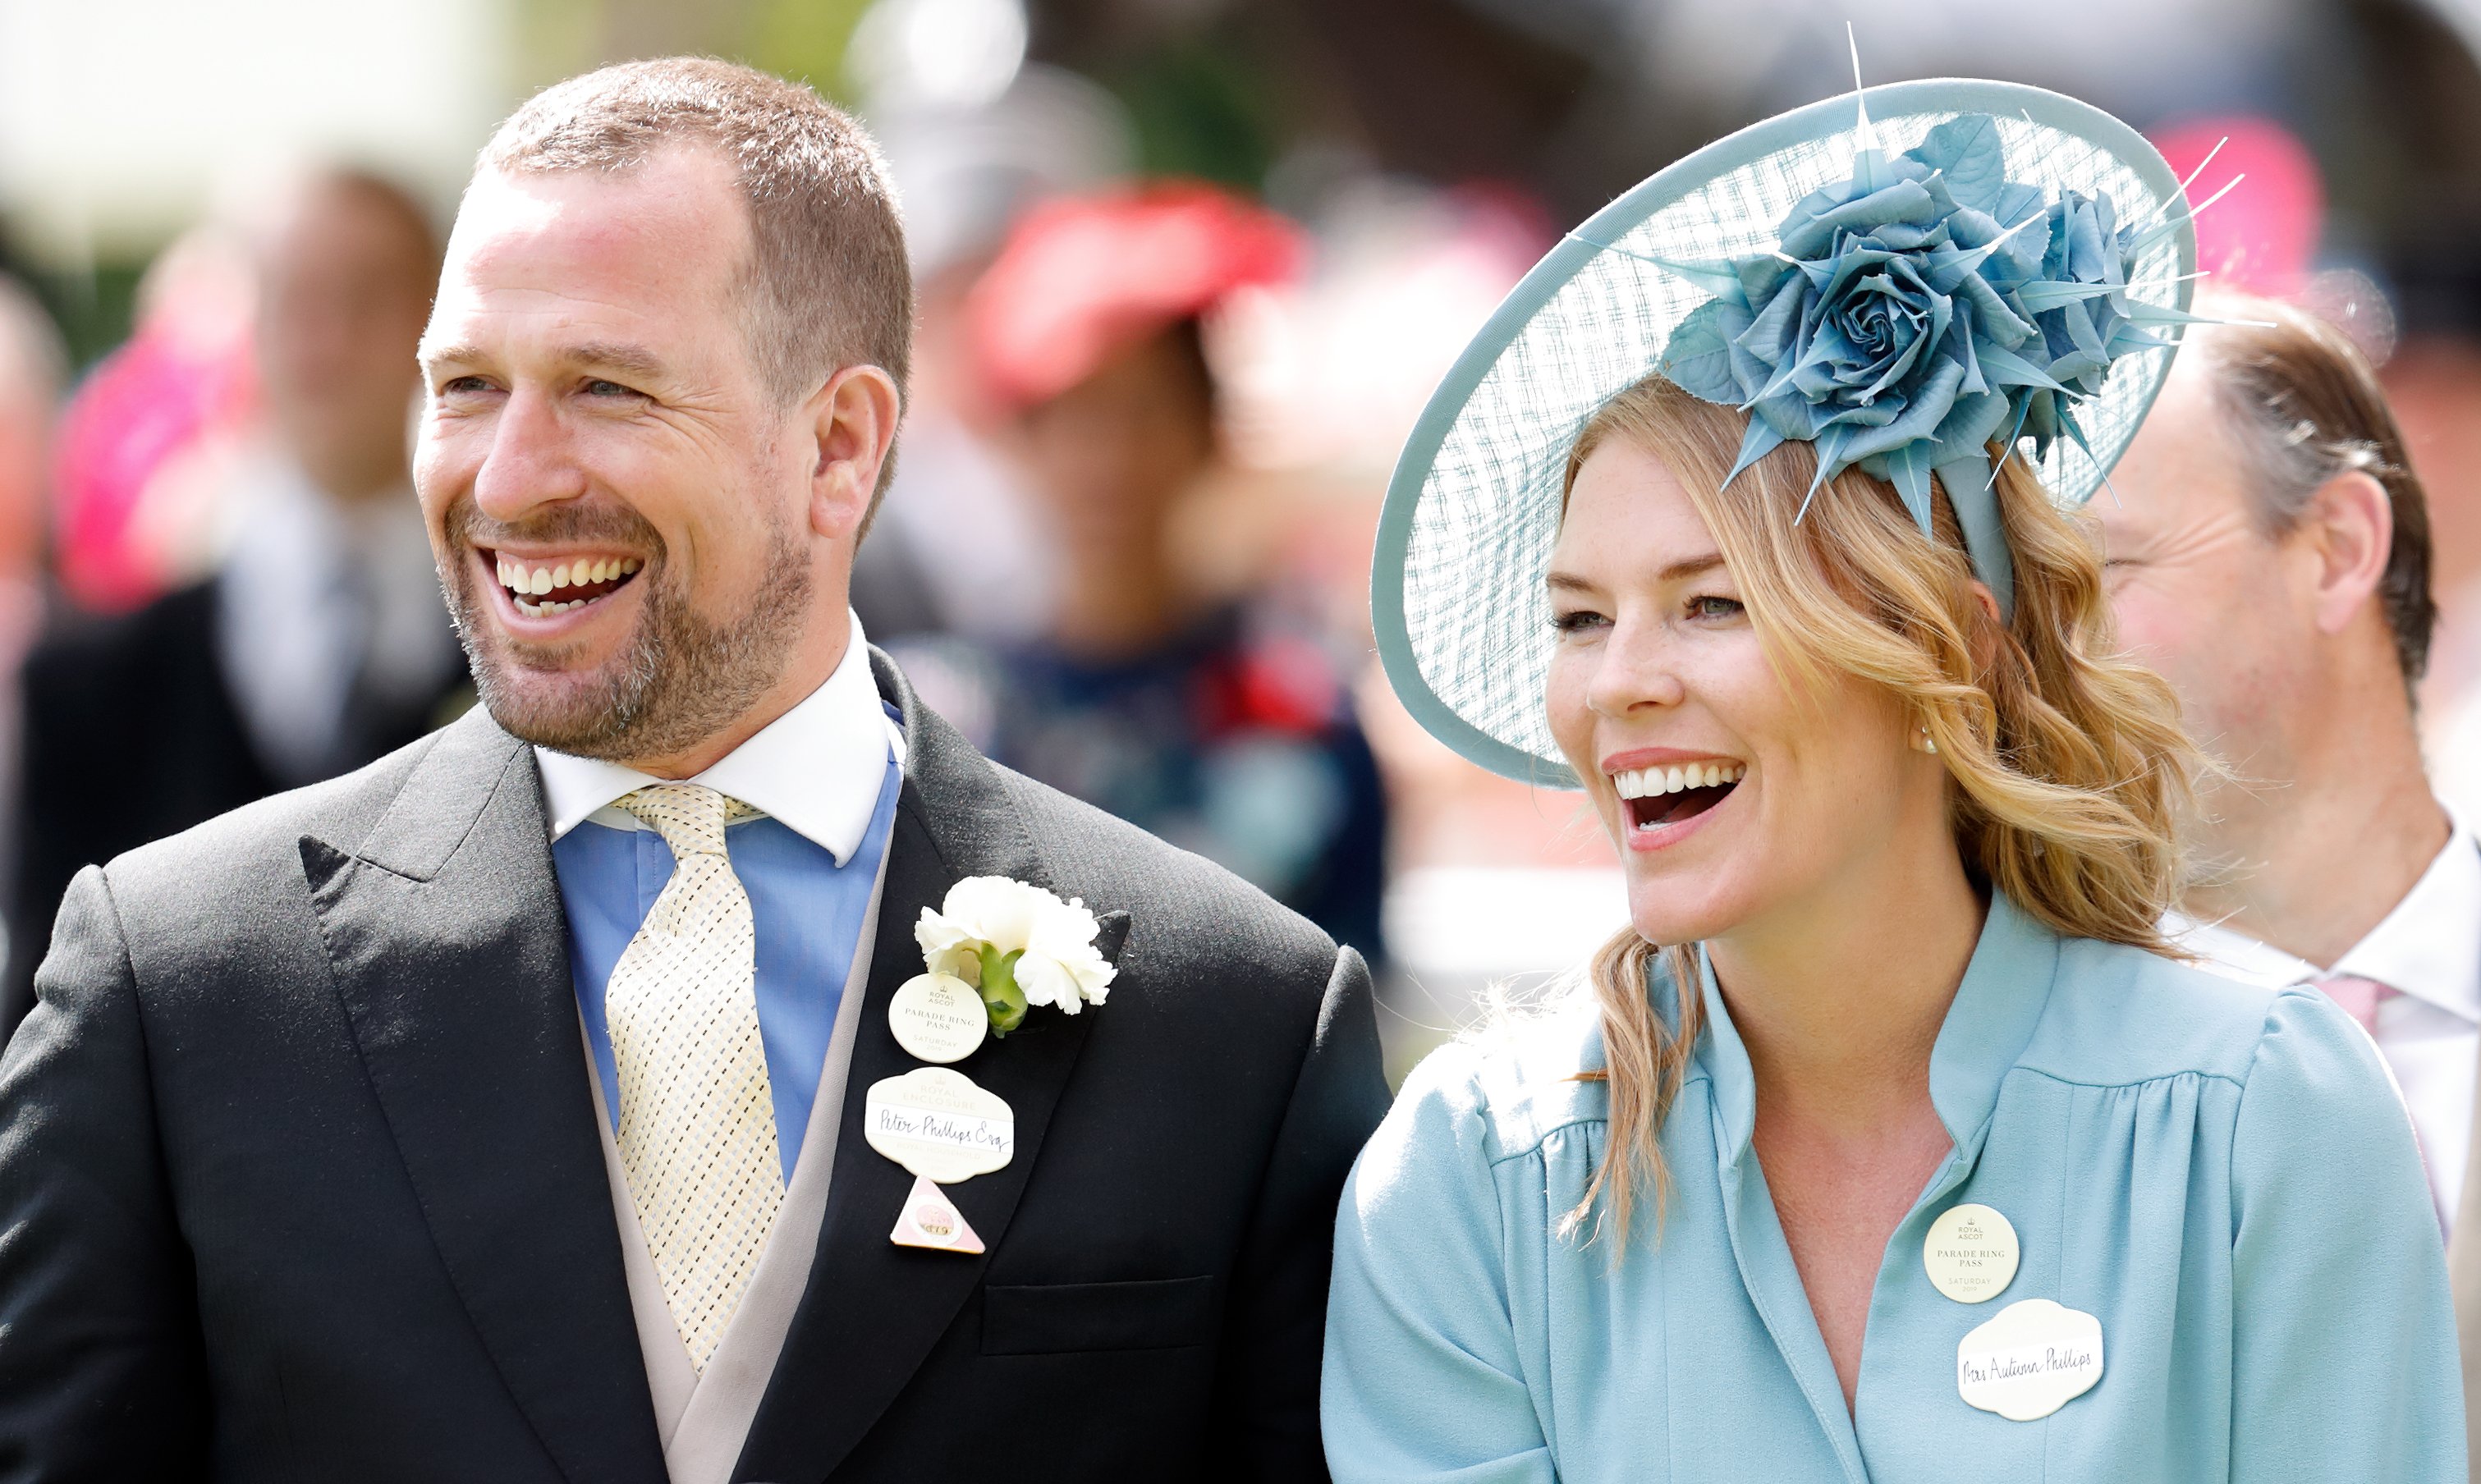 Peter Phillips and Autumn Phillips attend Royal Ascot at Ascot Racecourse on June 22, 2019 in Ascot, England | Photo: Getty Images